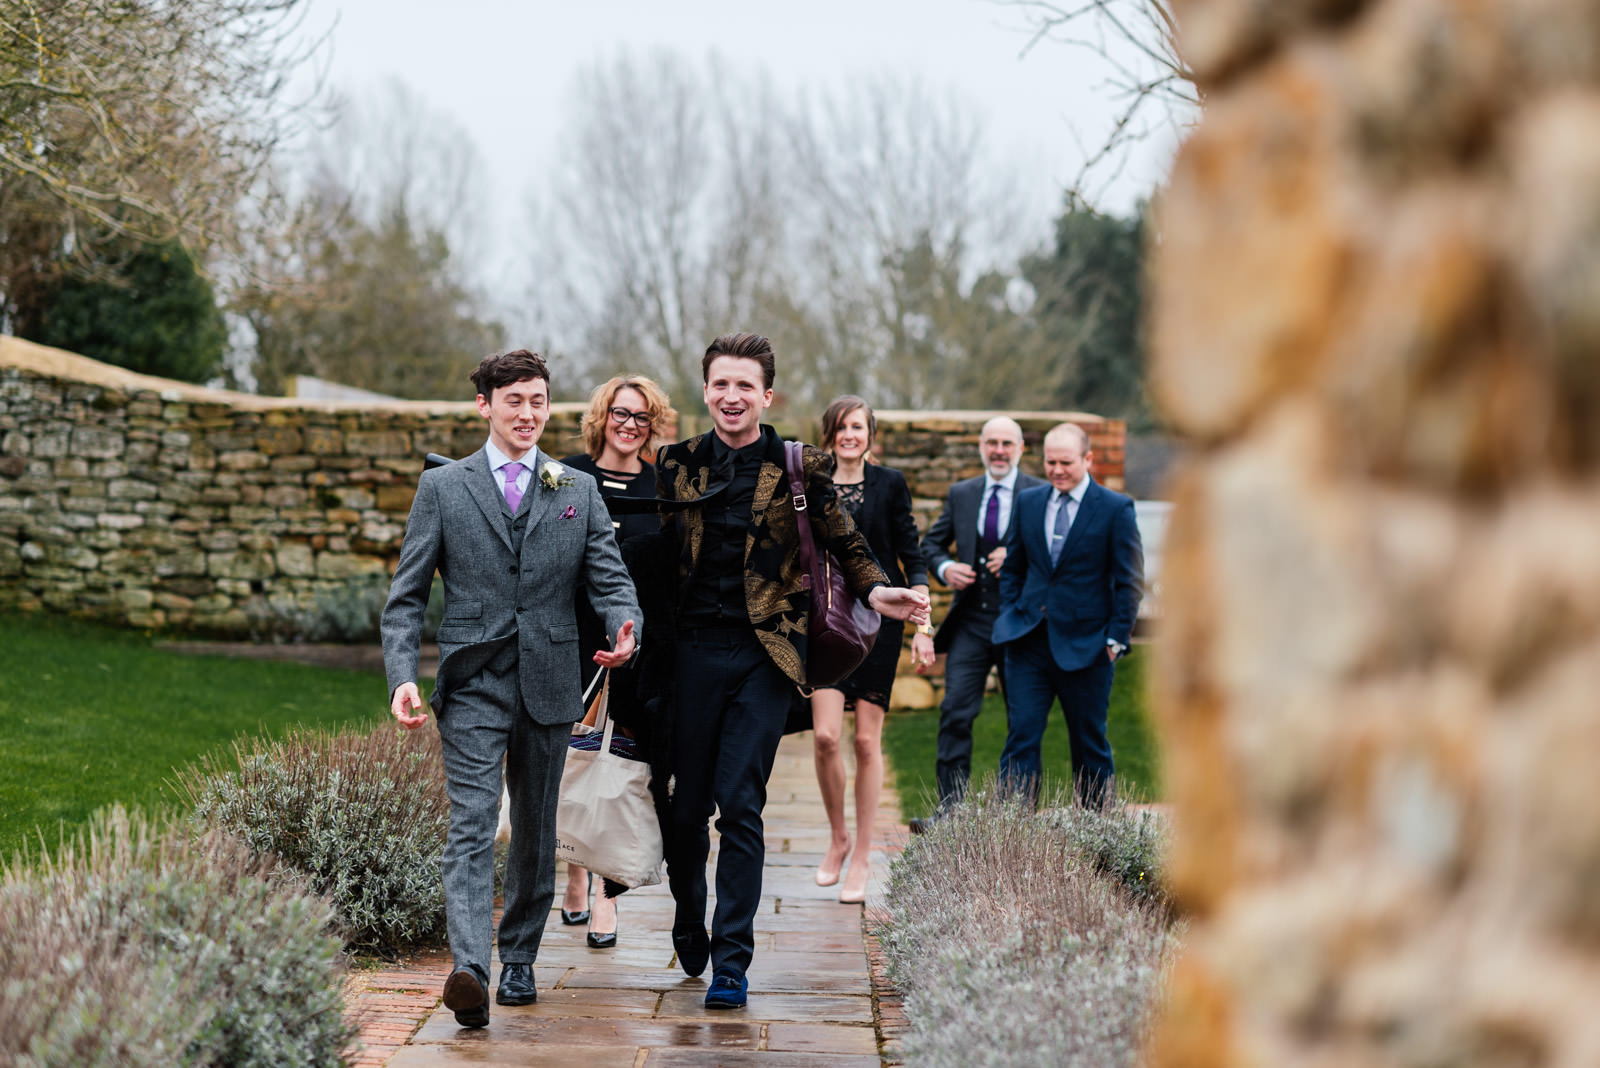 Guests arriving at Dodford Manor